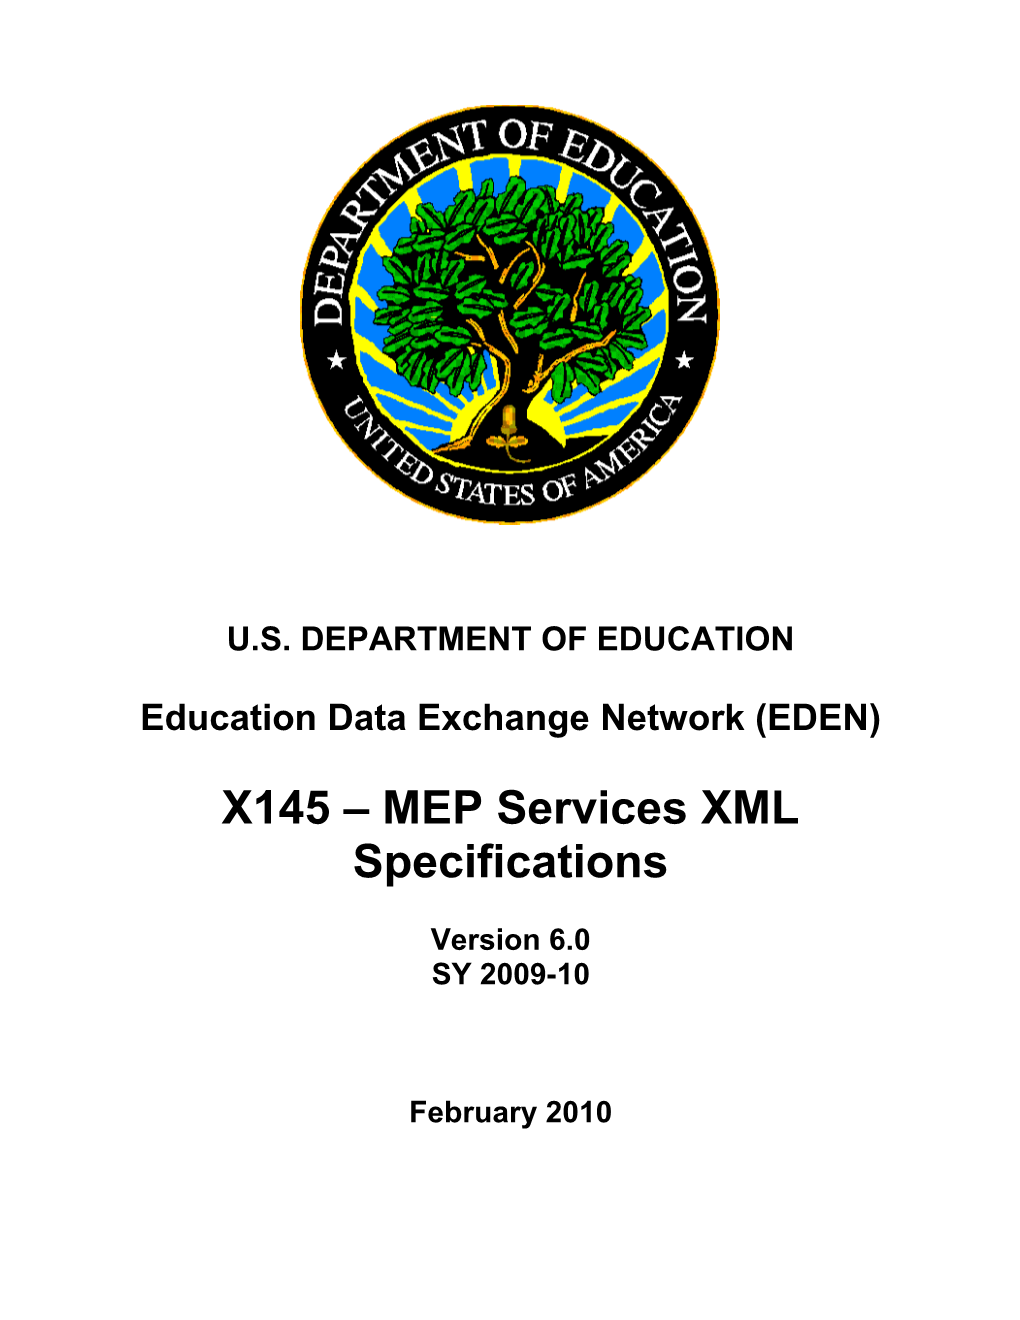 MEP Services XML Specifications